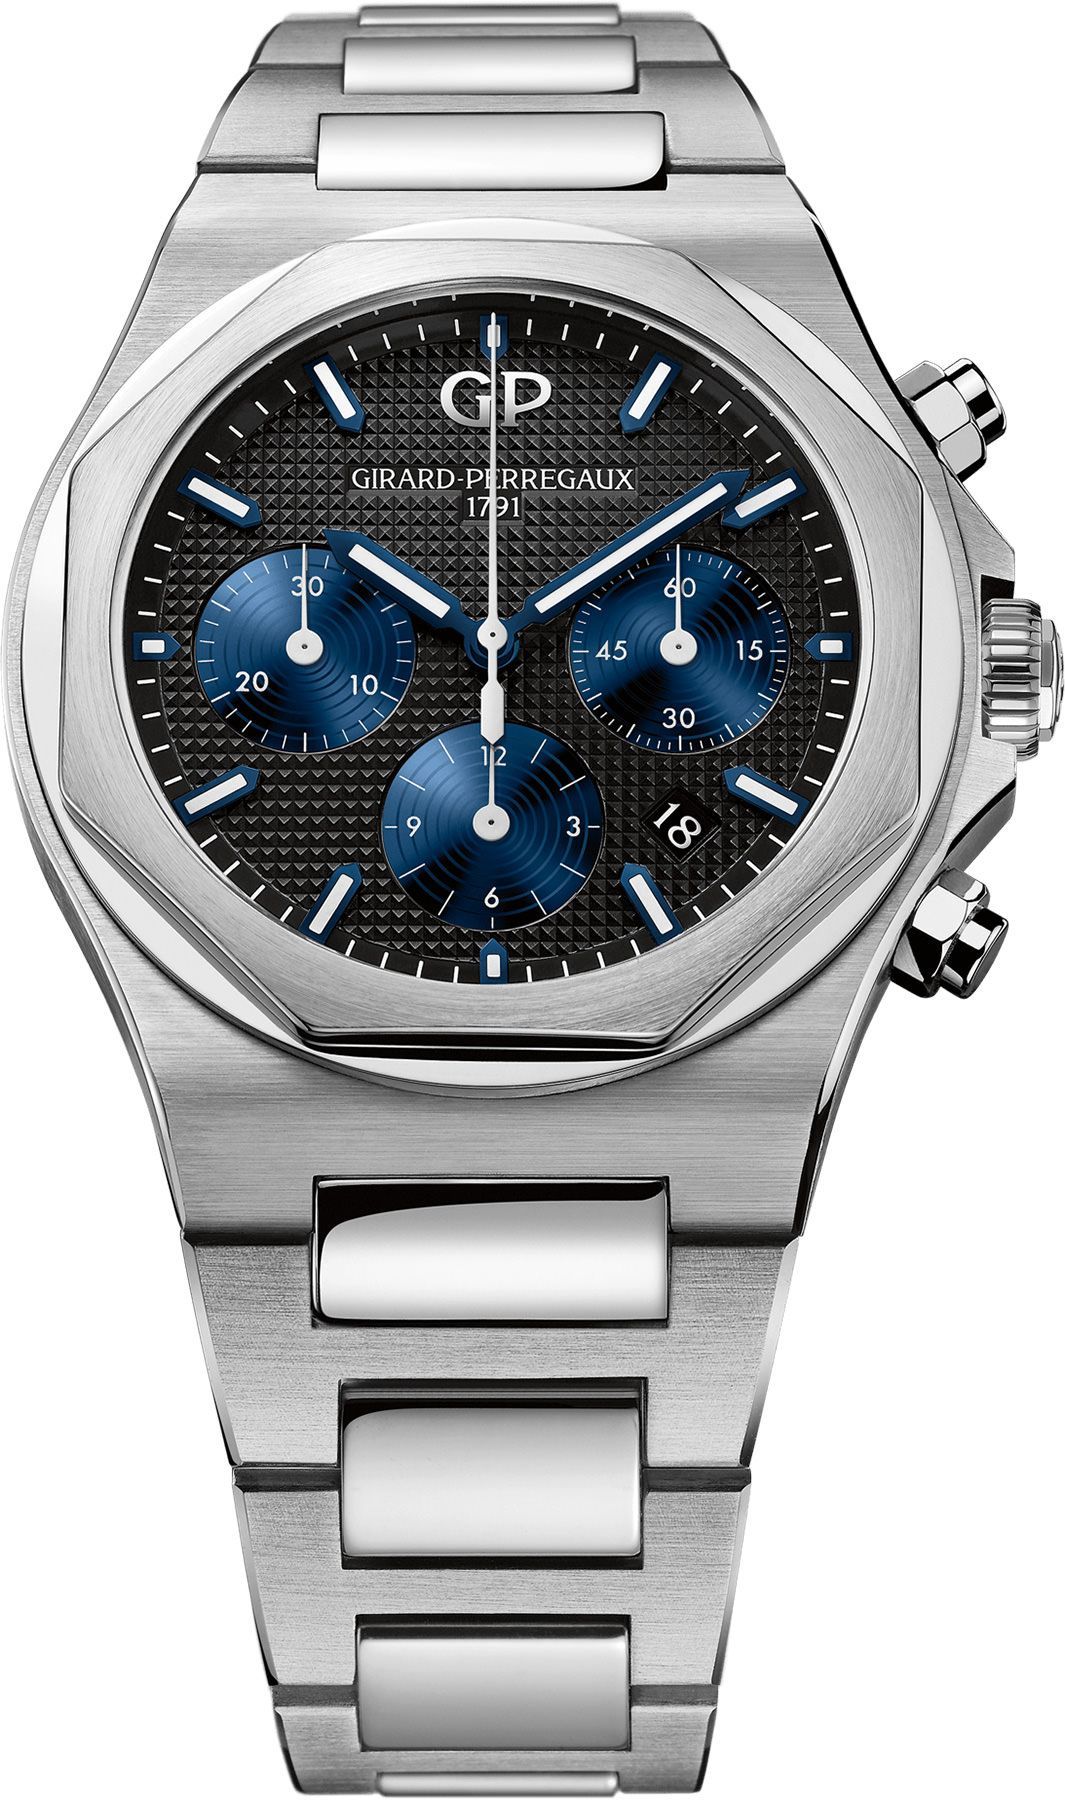 Girard-Perregaux Chronograph 42 mm Watch in Multicolor Dial For Men - 1